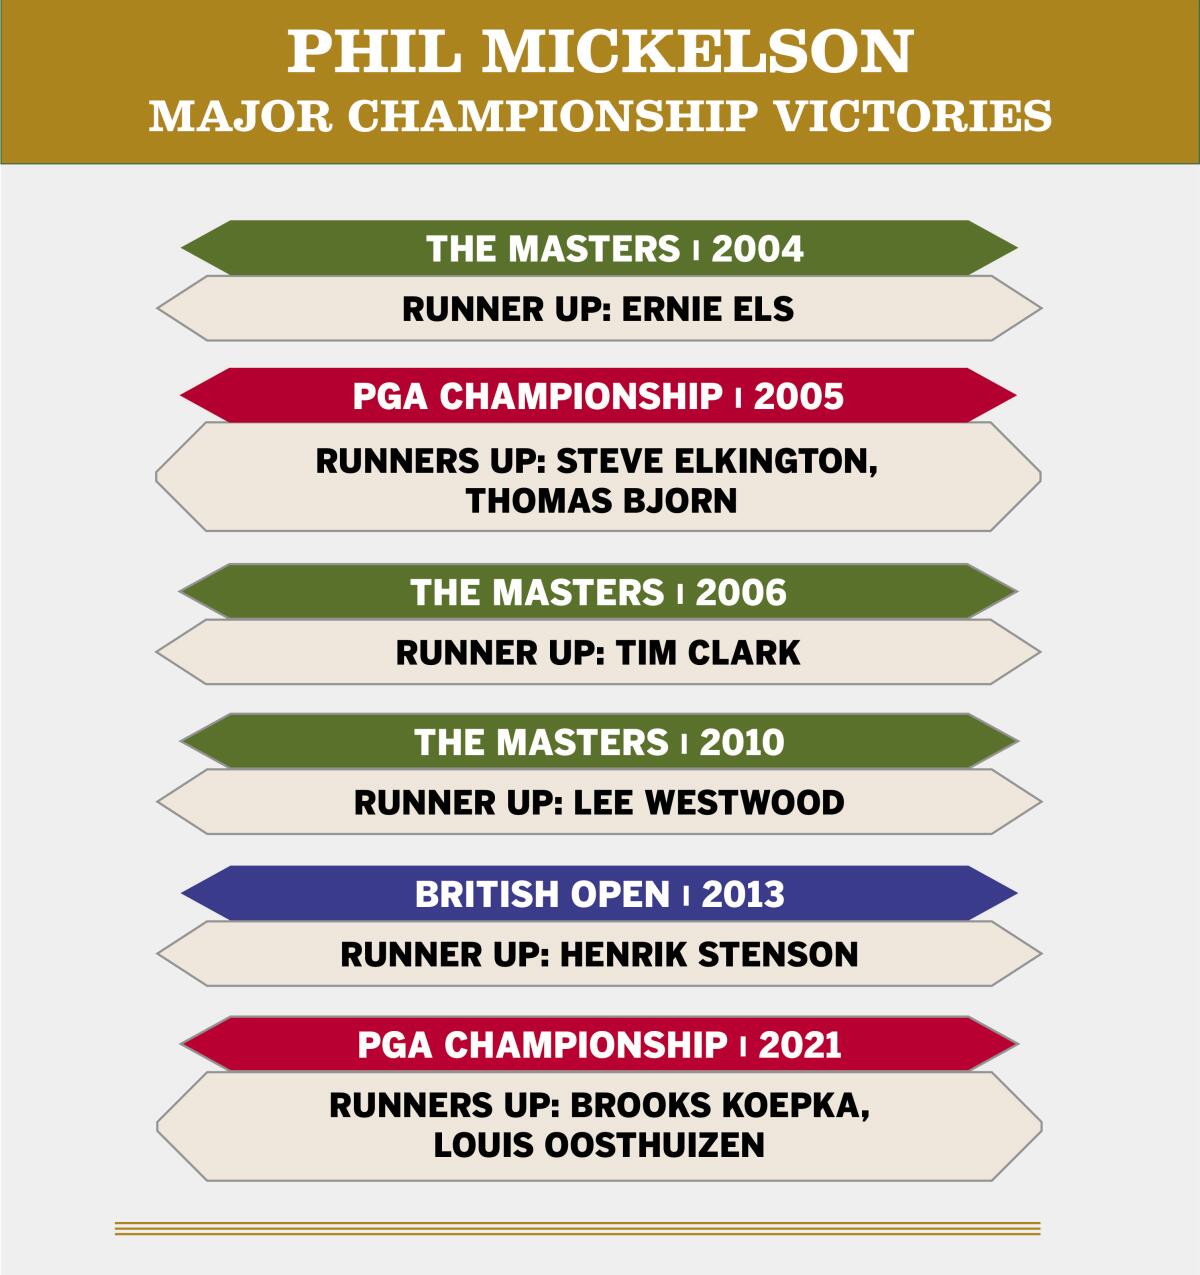 Phil Mickelson's major golf victories.